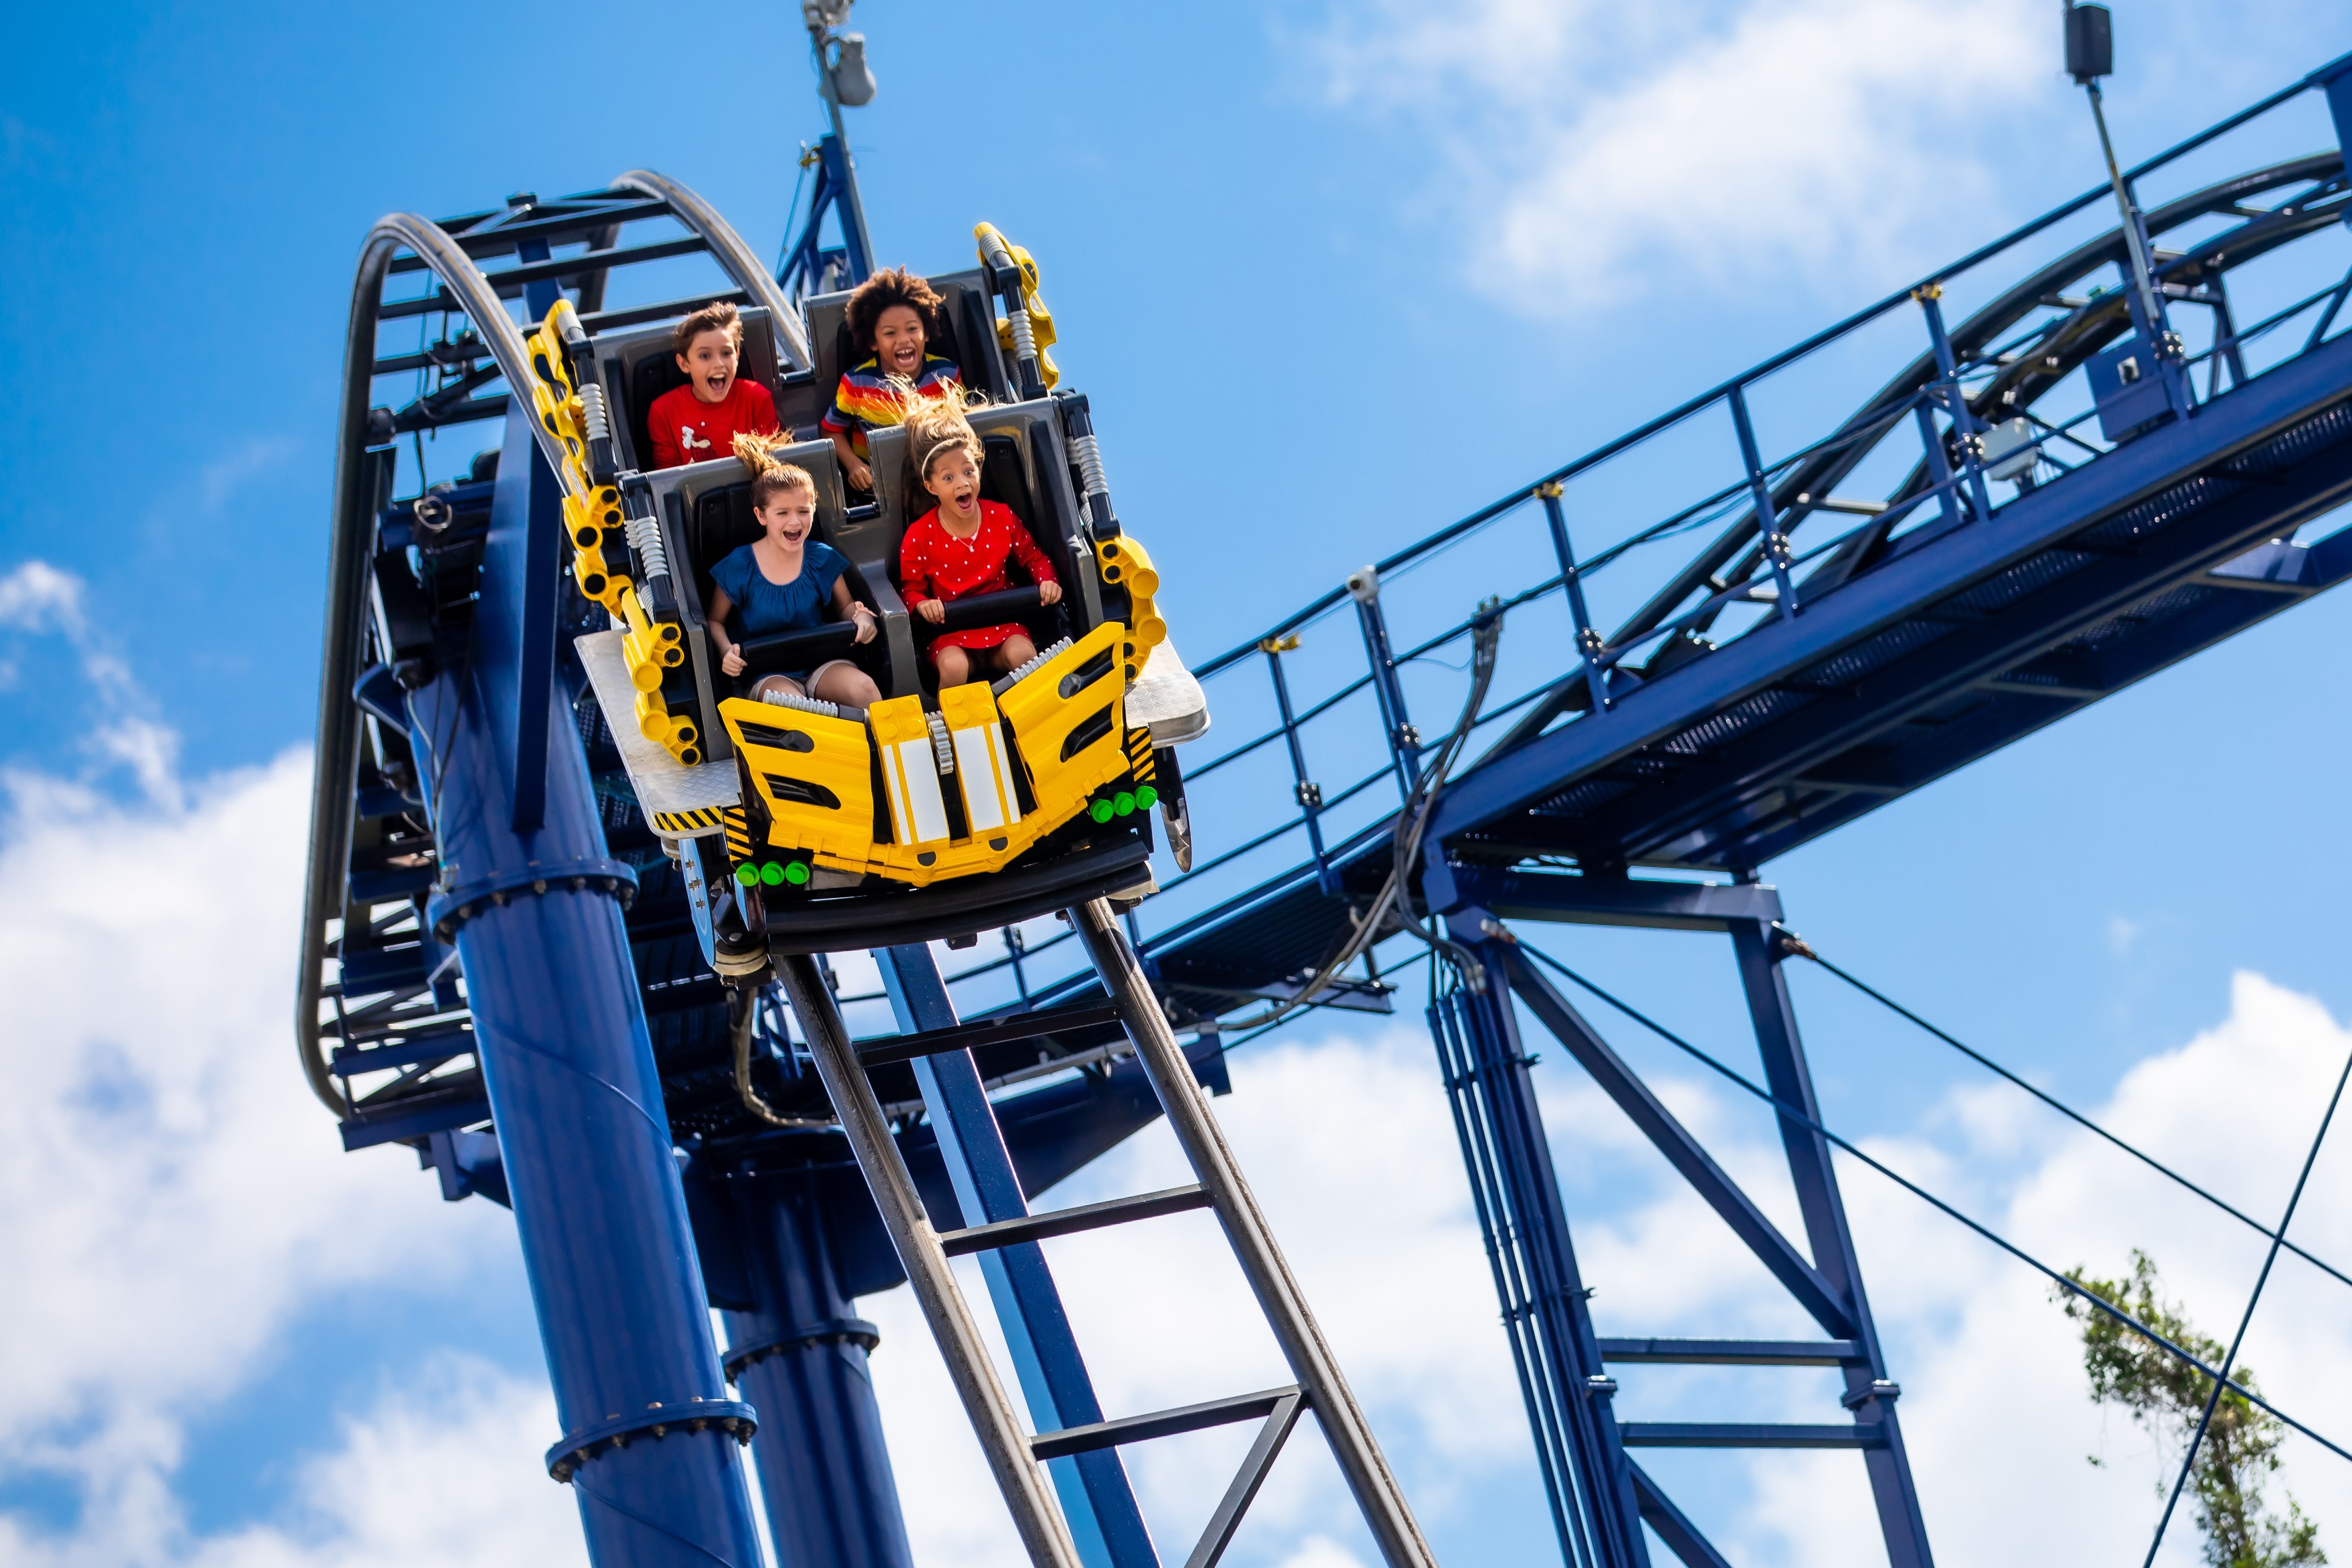 Merlin Entertainments and Hasbro reveal rides and attractions for